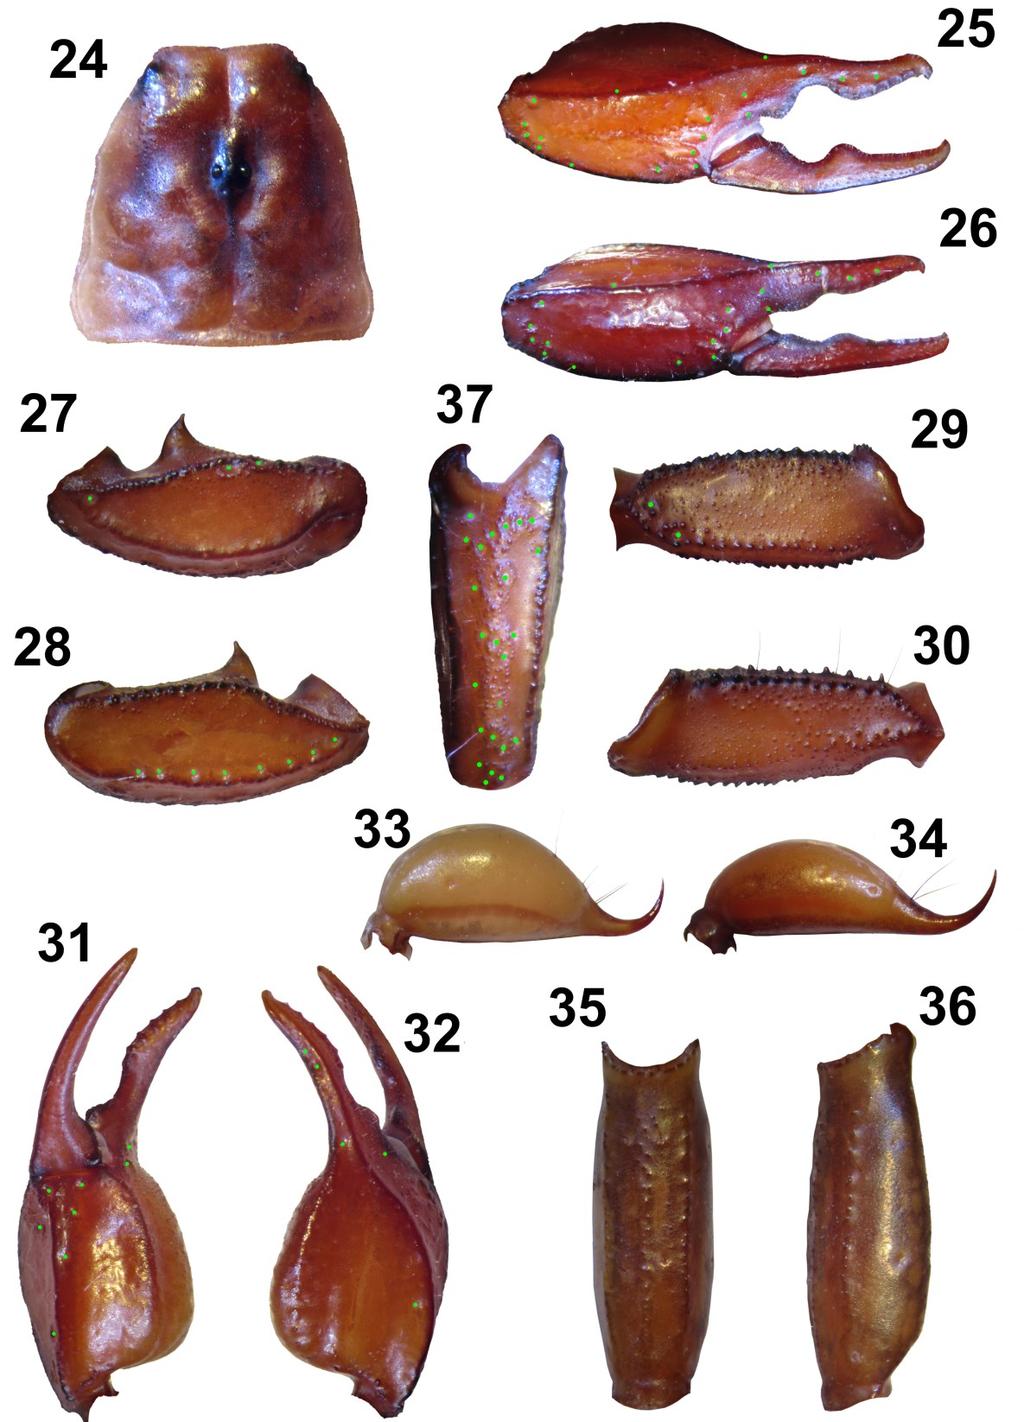 Tropea et al.: Three New Euscorpius From Greece 11 Figures 24 37: Euscorpius kinzelbachi sp. n. 24. Carapace. 25. External view of the chela of adult male. 26.